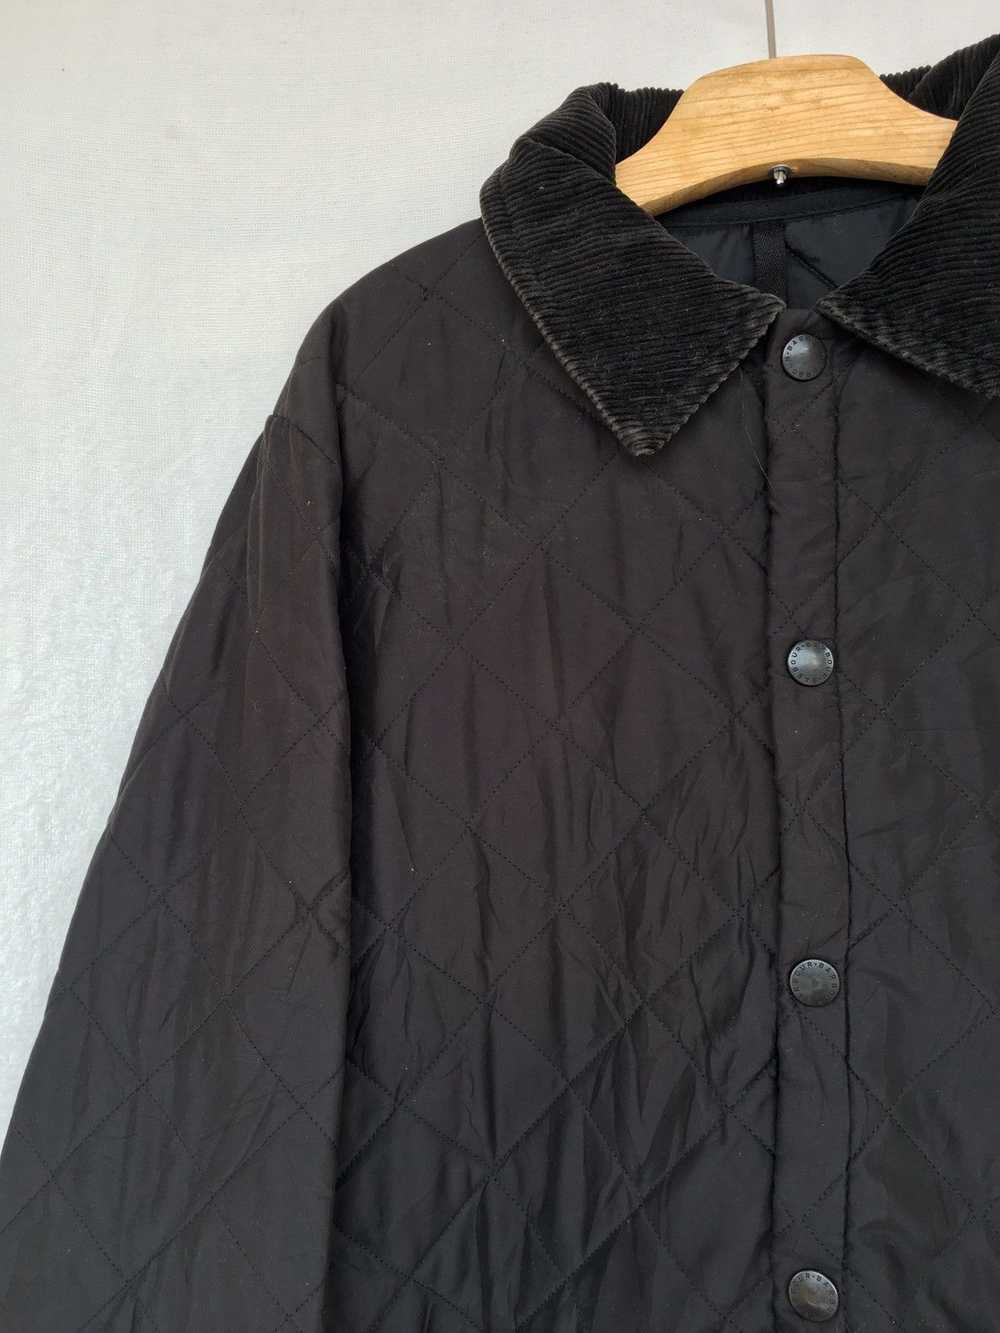 Barbour quilted jacket - image 5